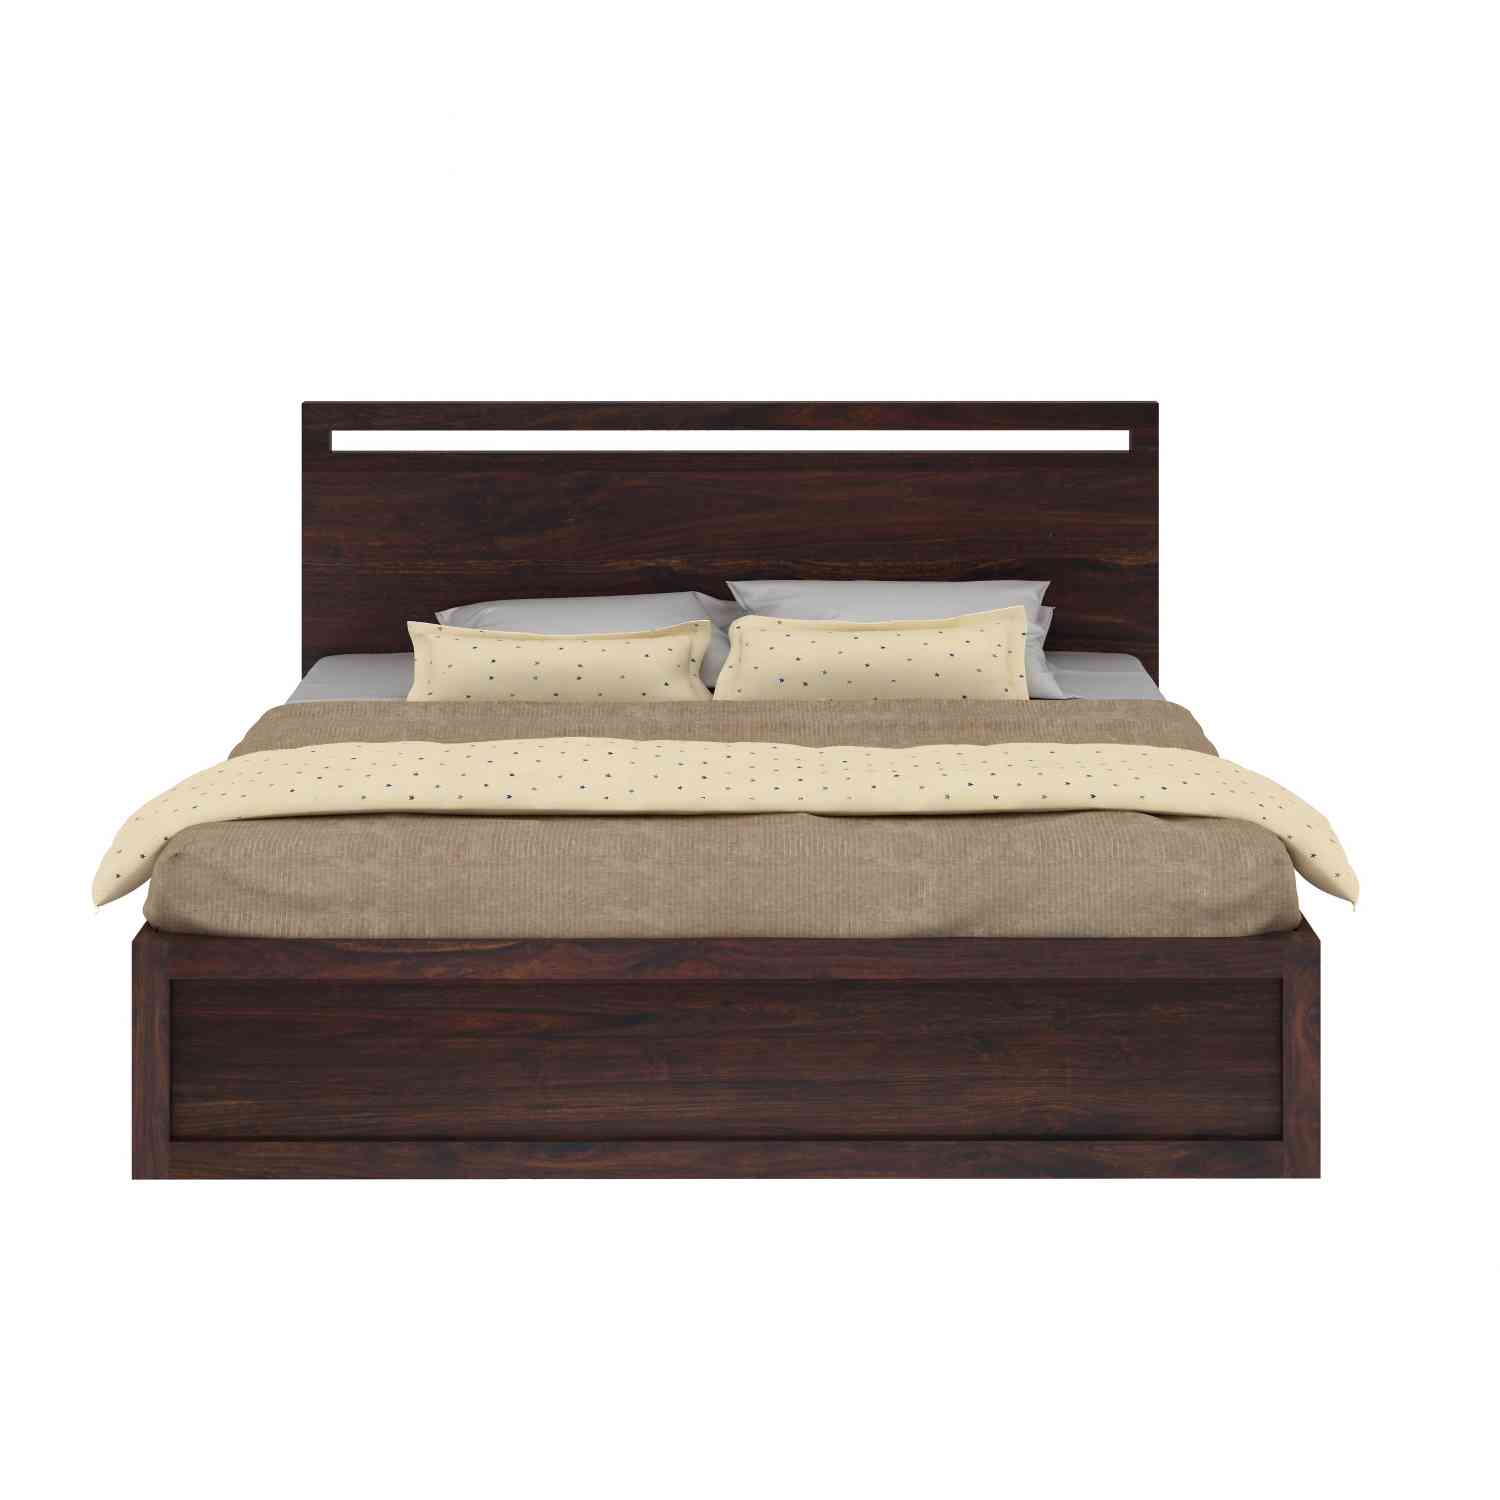 Livinn Solid Sheesham Wood Bed With Two Drawers (Queen Size, Walnut Finish)